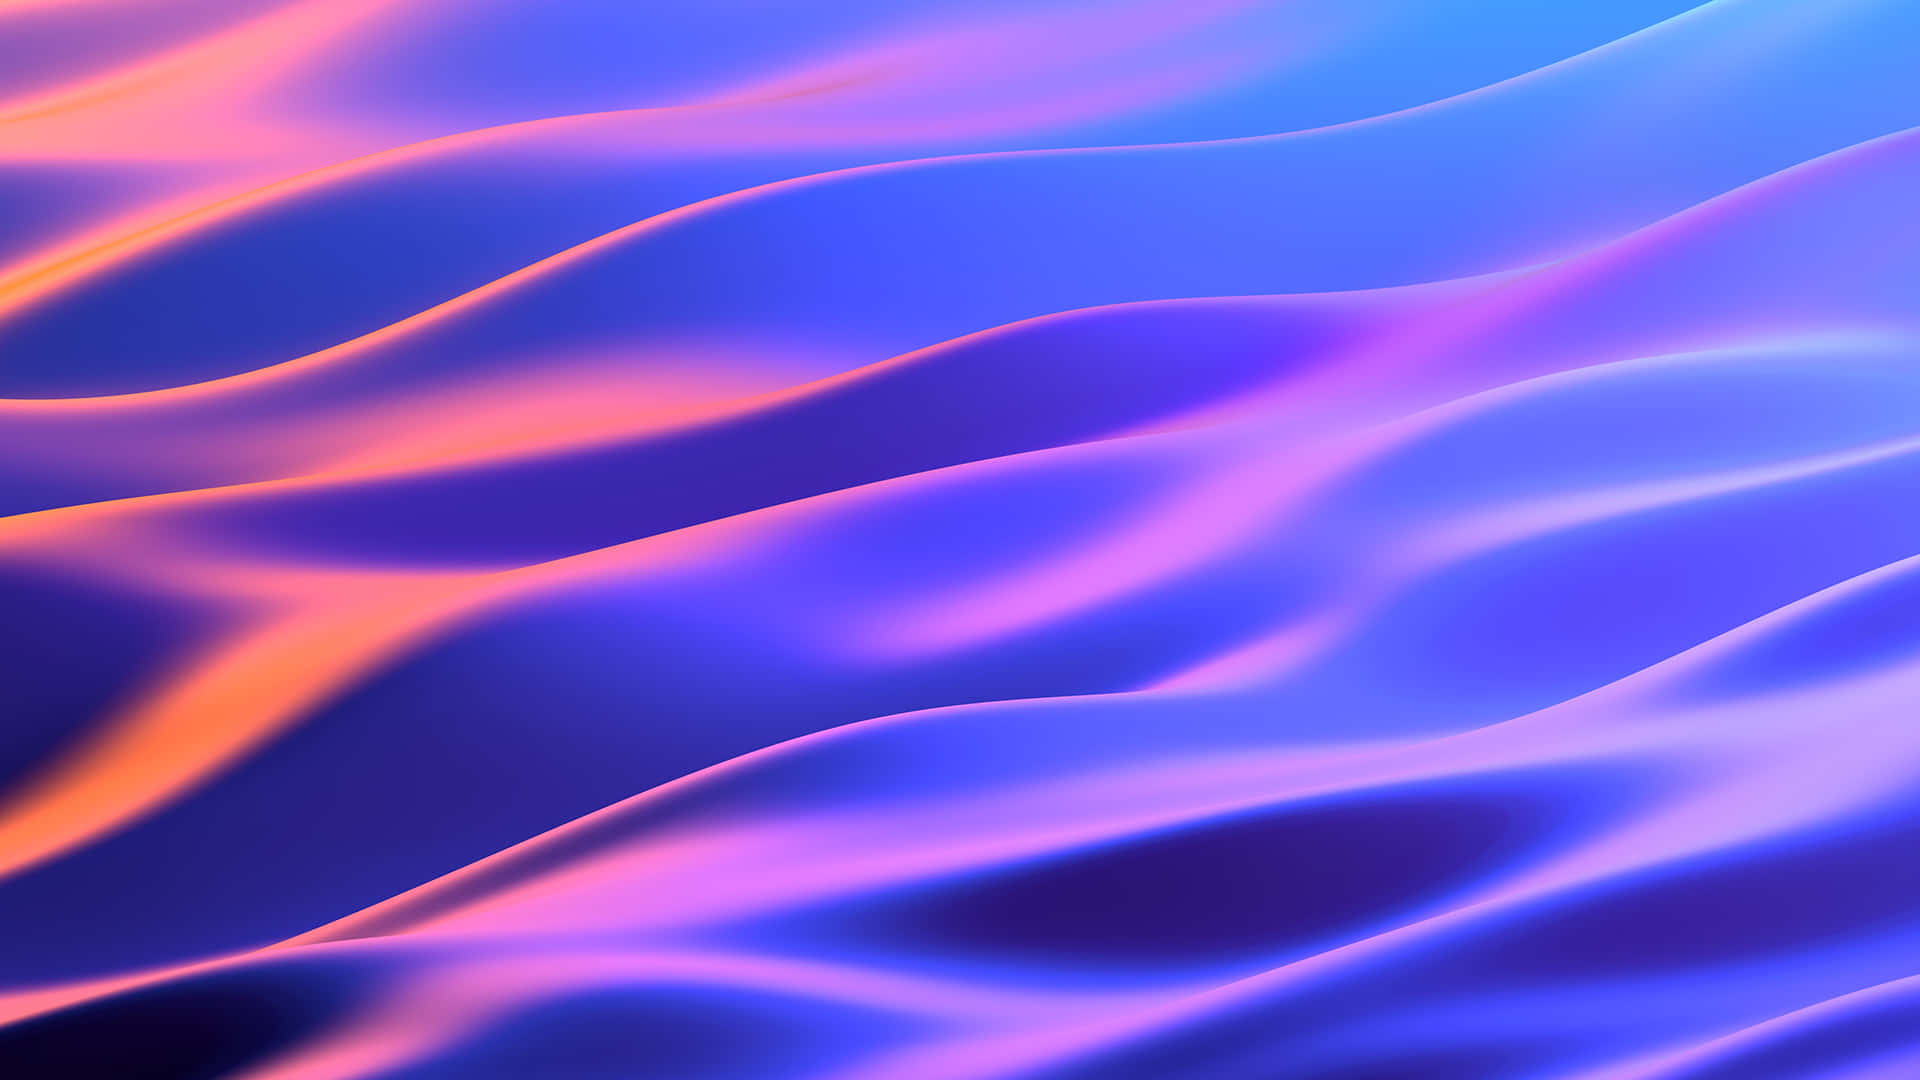 "Experience the vibrance of neon through an abstract digital mural." Wallpaper